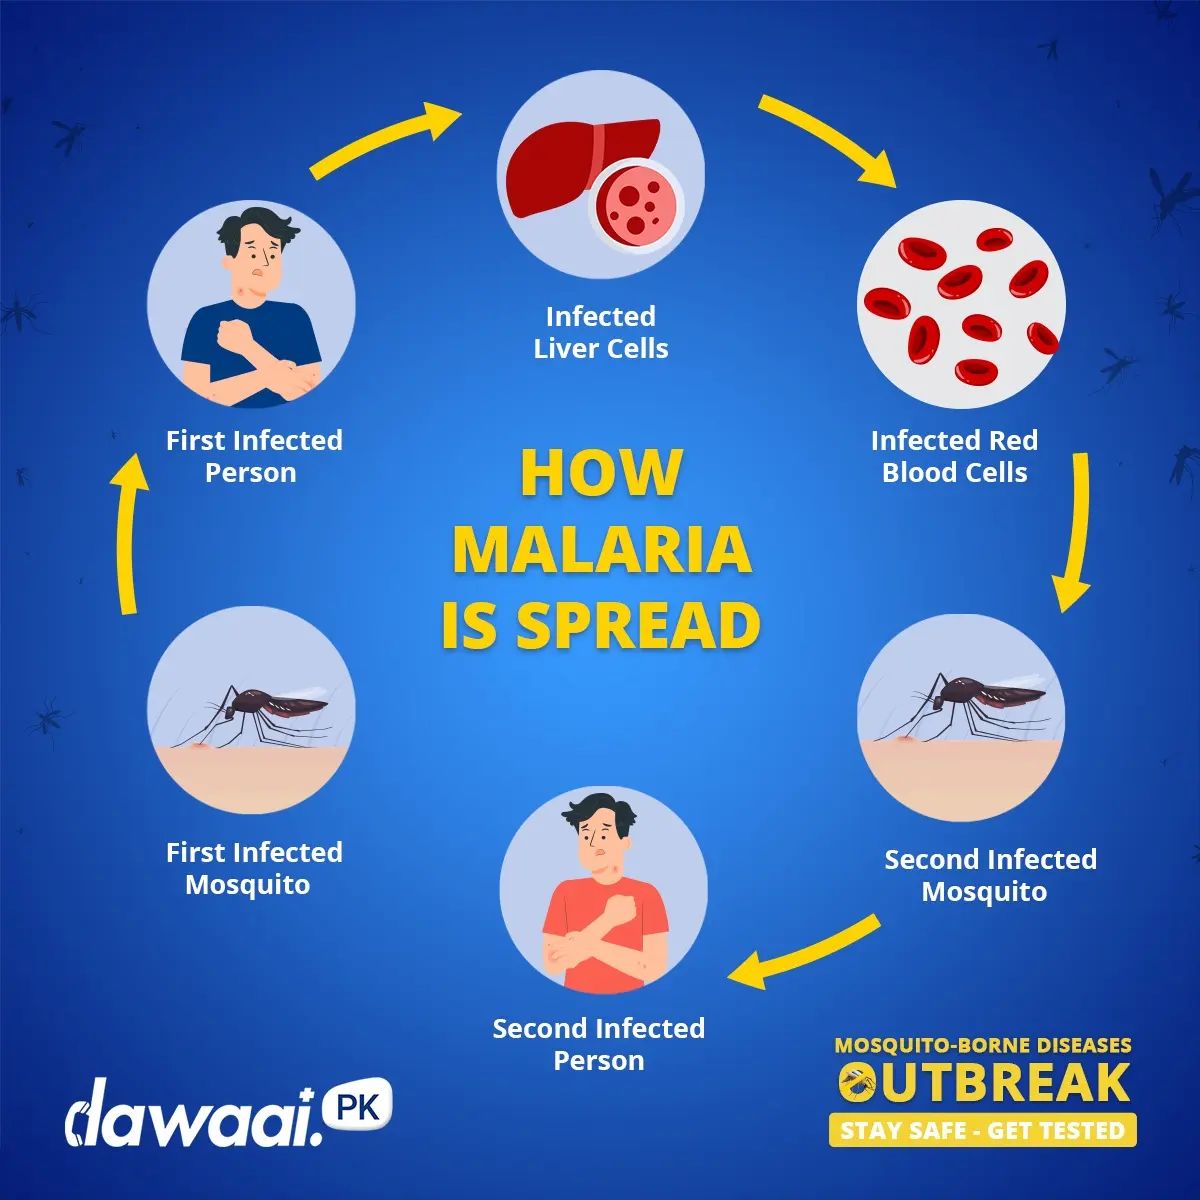 The spread of malaria takes place mostly due to proximity. Learn it's transmission cycle to stay informed! 
With the ongoing mosquito-borne diseases on the rise, get tested to stay safe!
Get the malaria test now 👇
https://bit.ly/3D4myK5